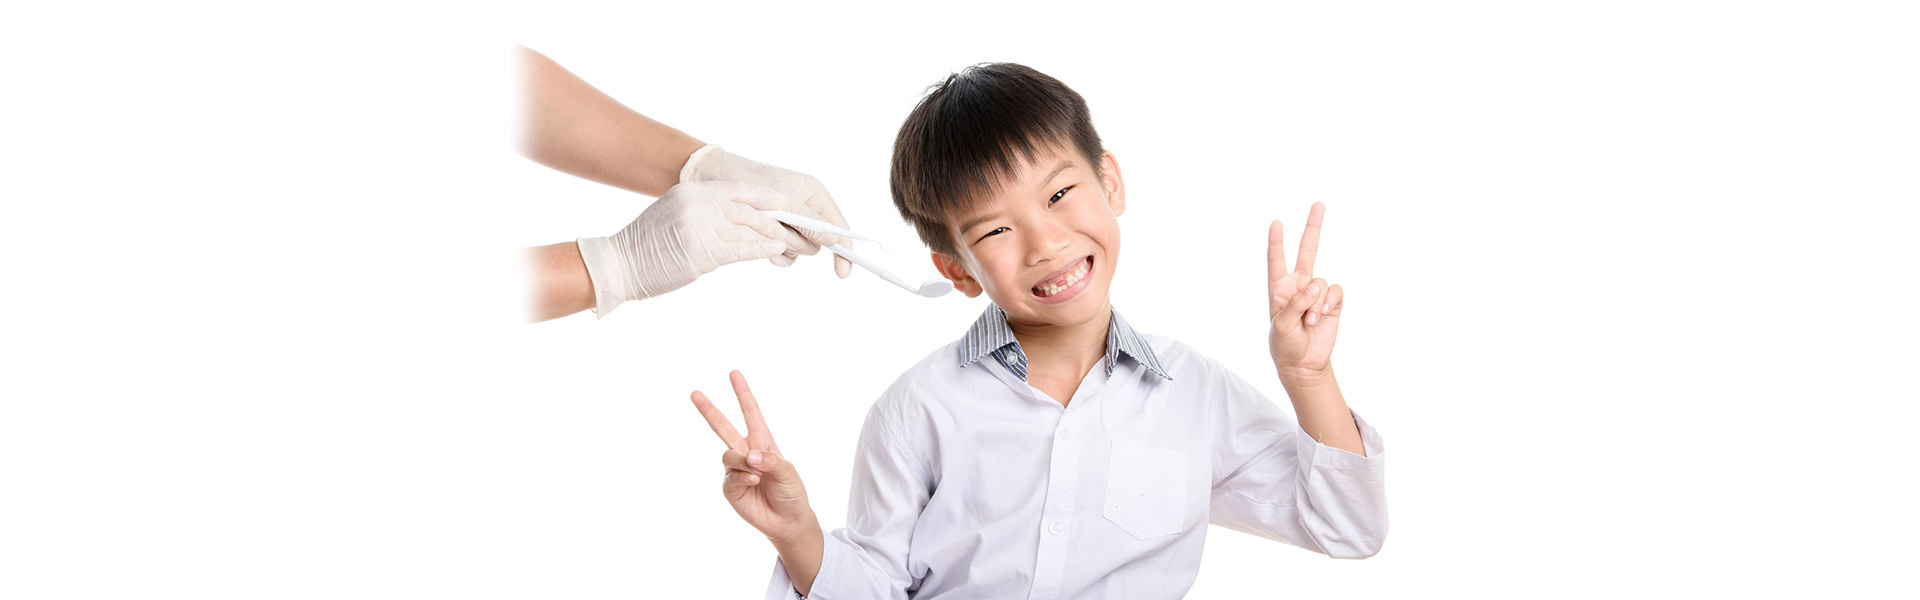 How to Protect Your Child’s Smile Using Dental Sealants